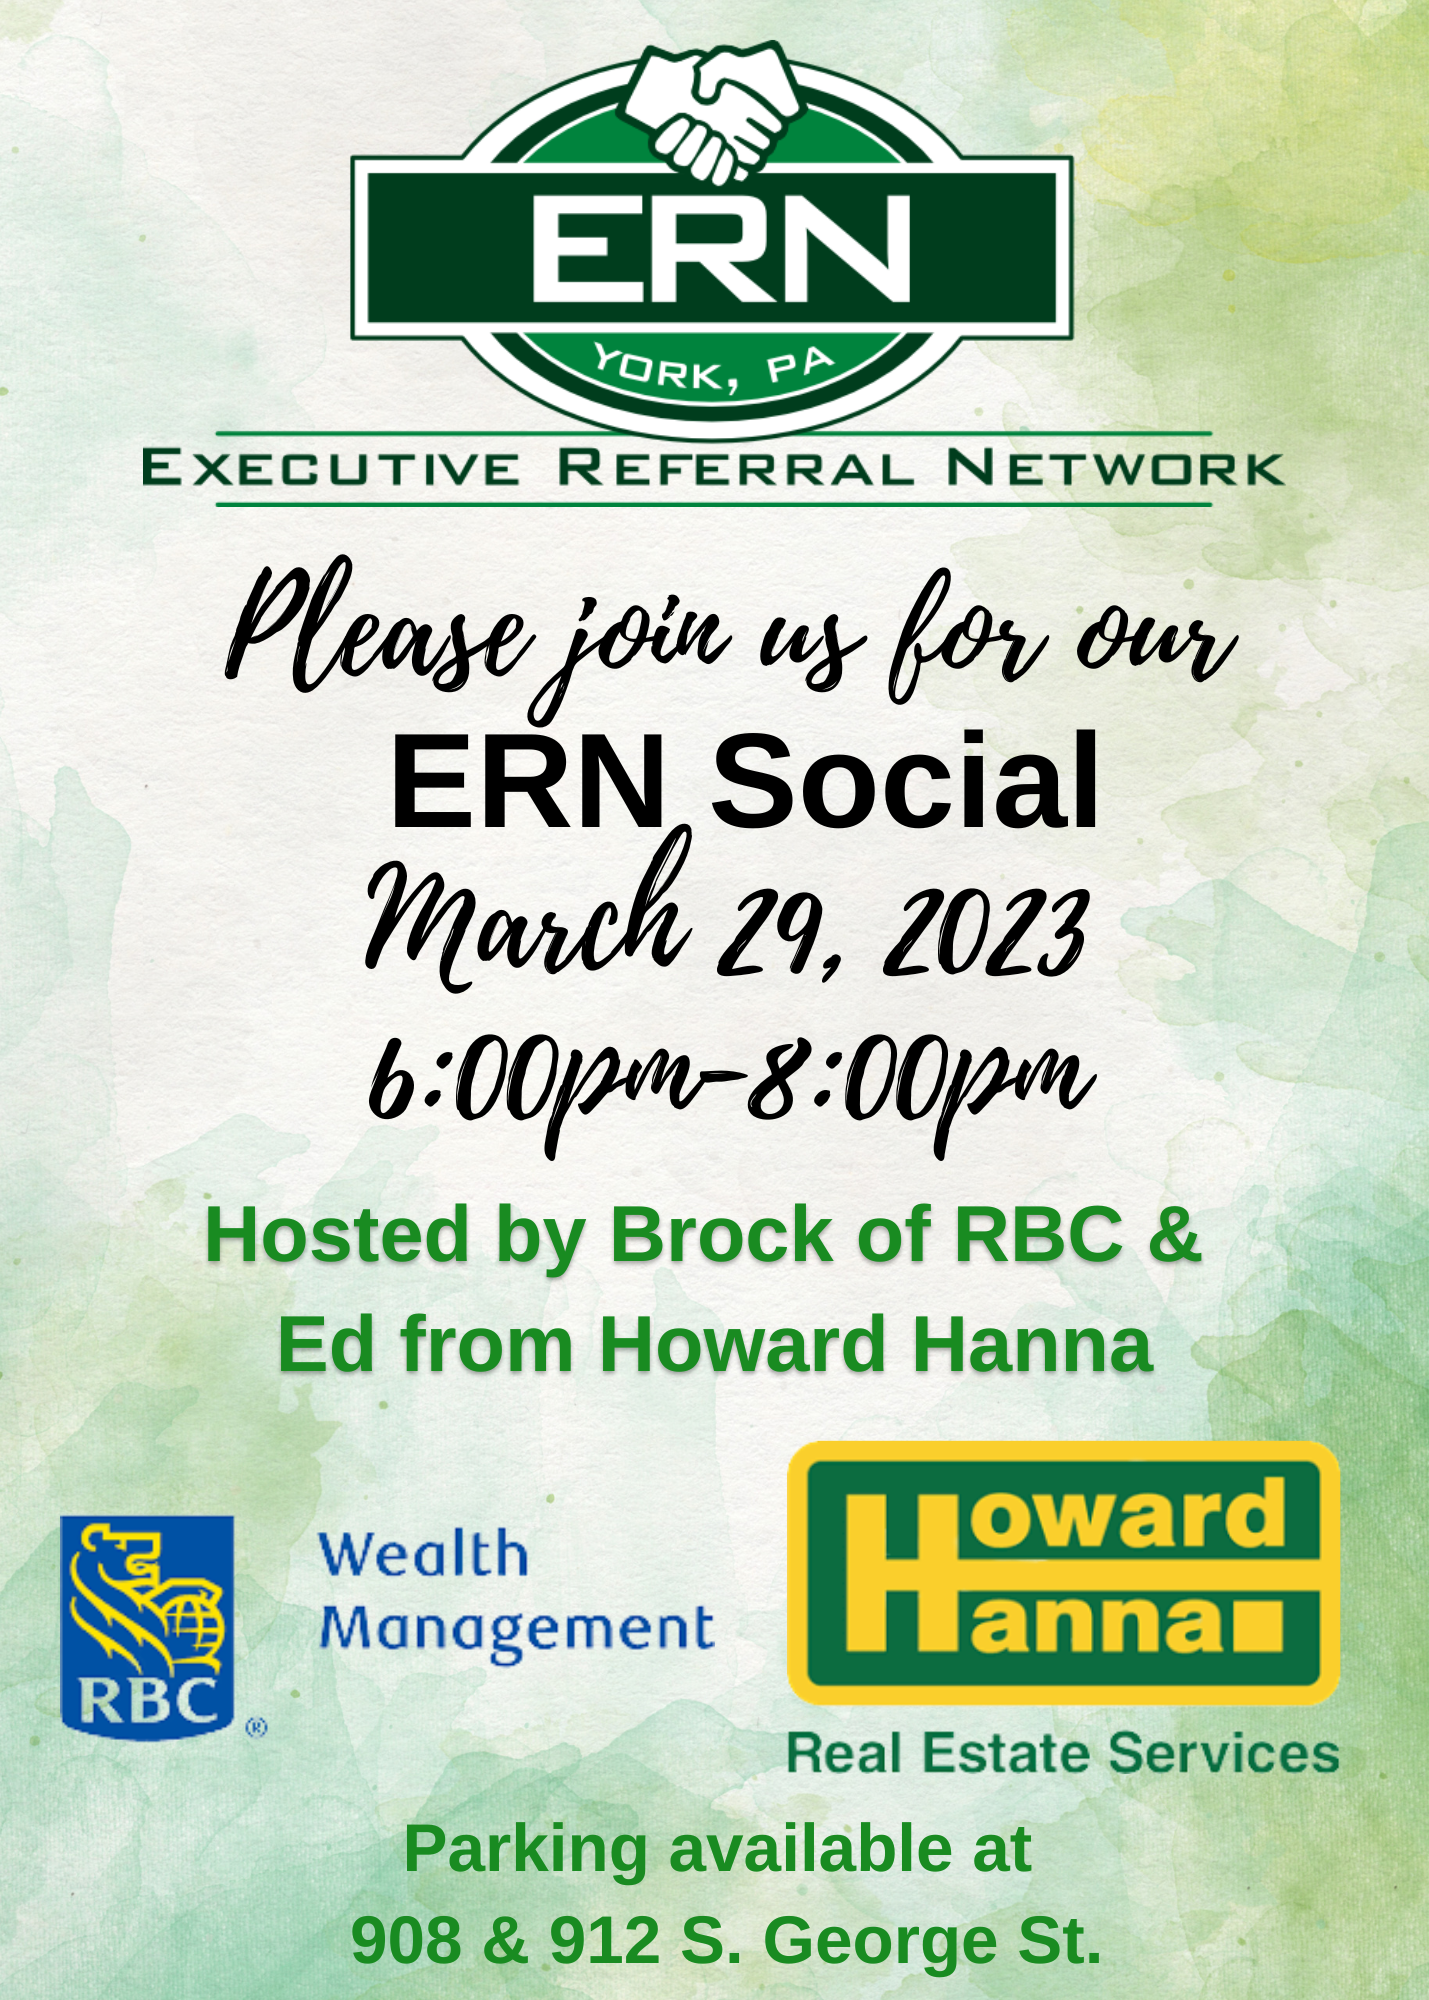 Please join us for our ERN social March 29, 2023 600pm-800pm